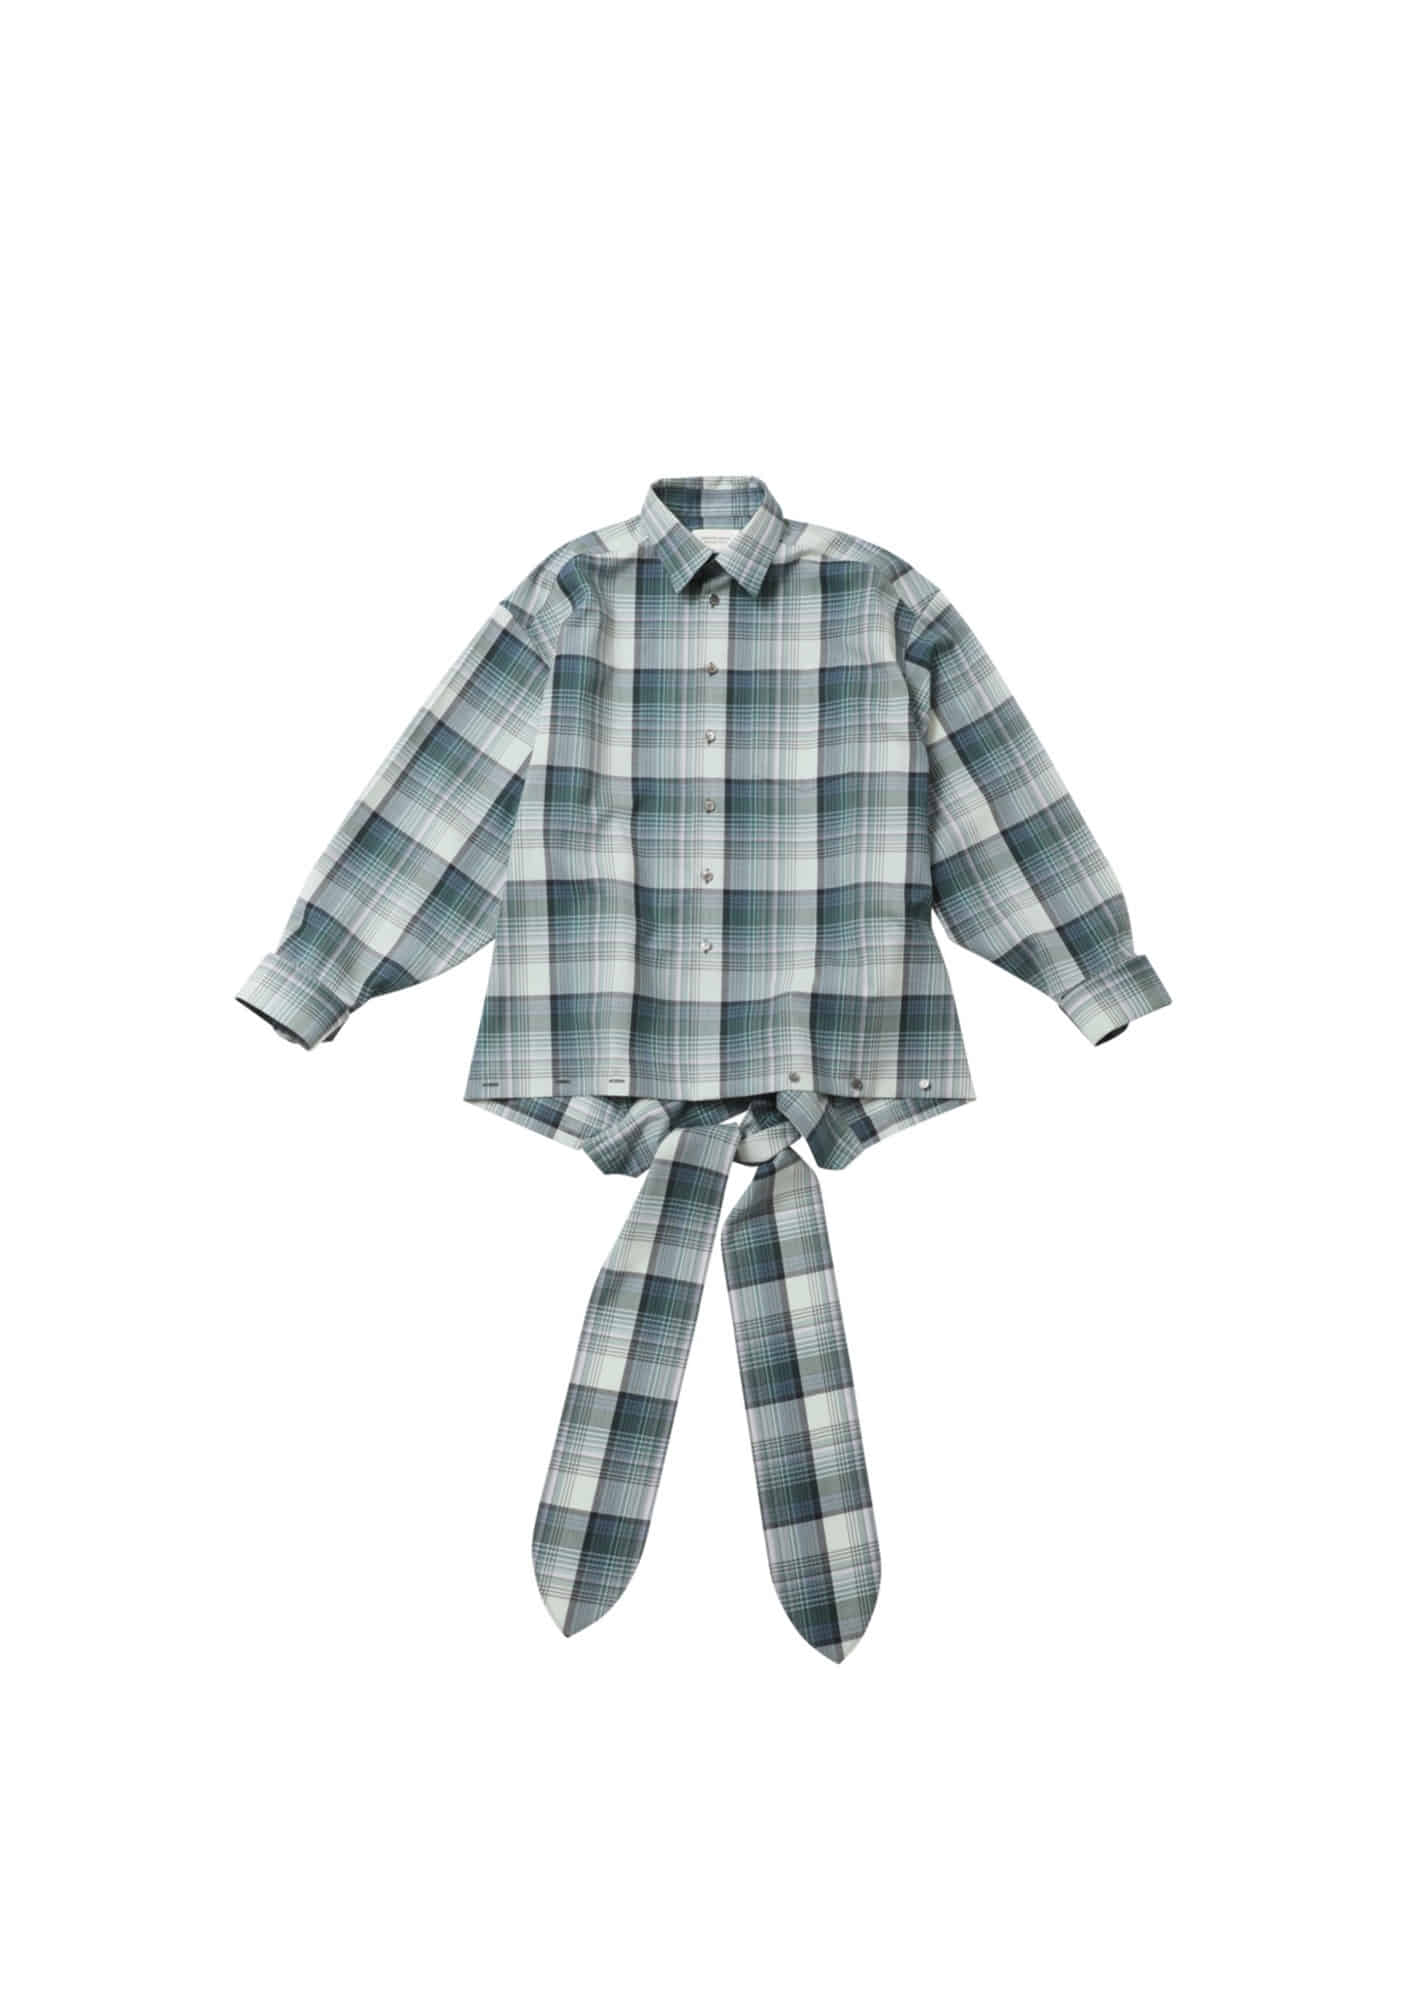 DOUBLE-END SHADOW CHECK ASCOTTIE SHIRT